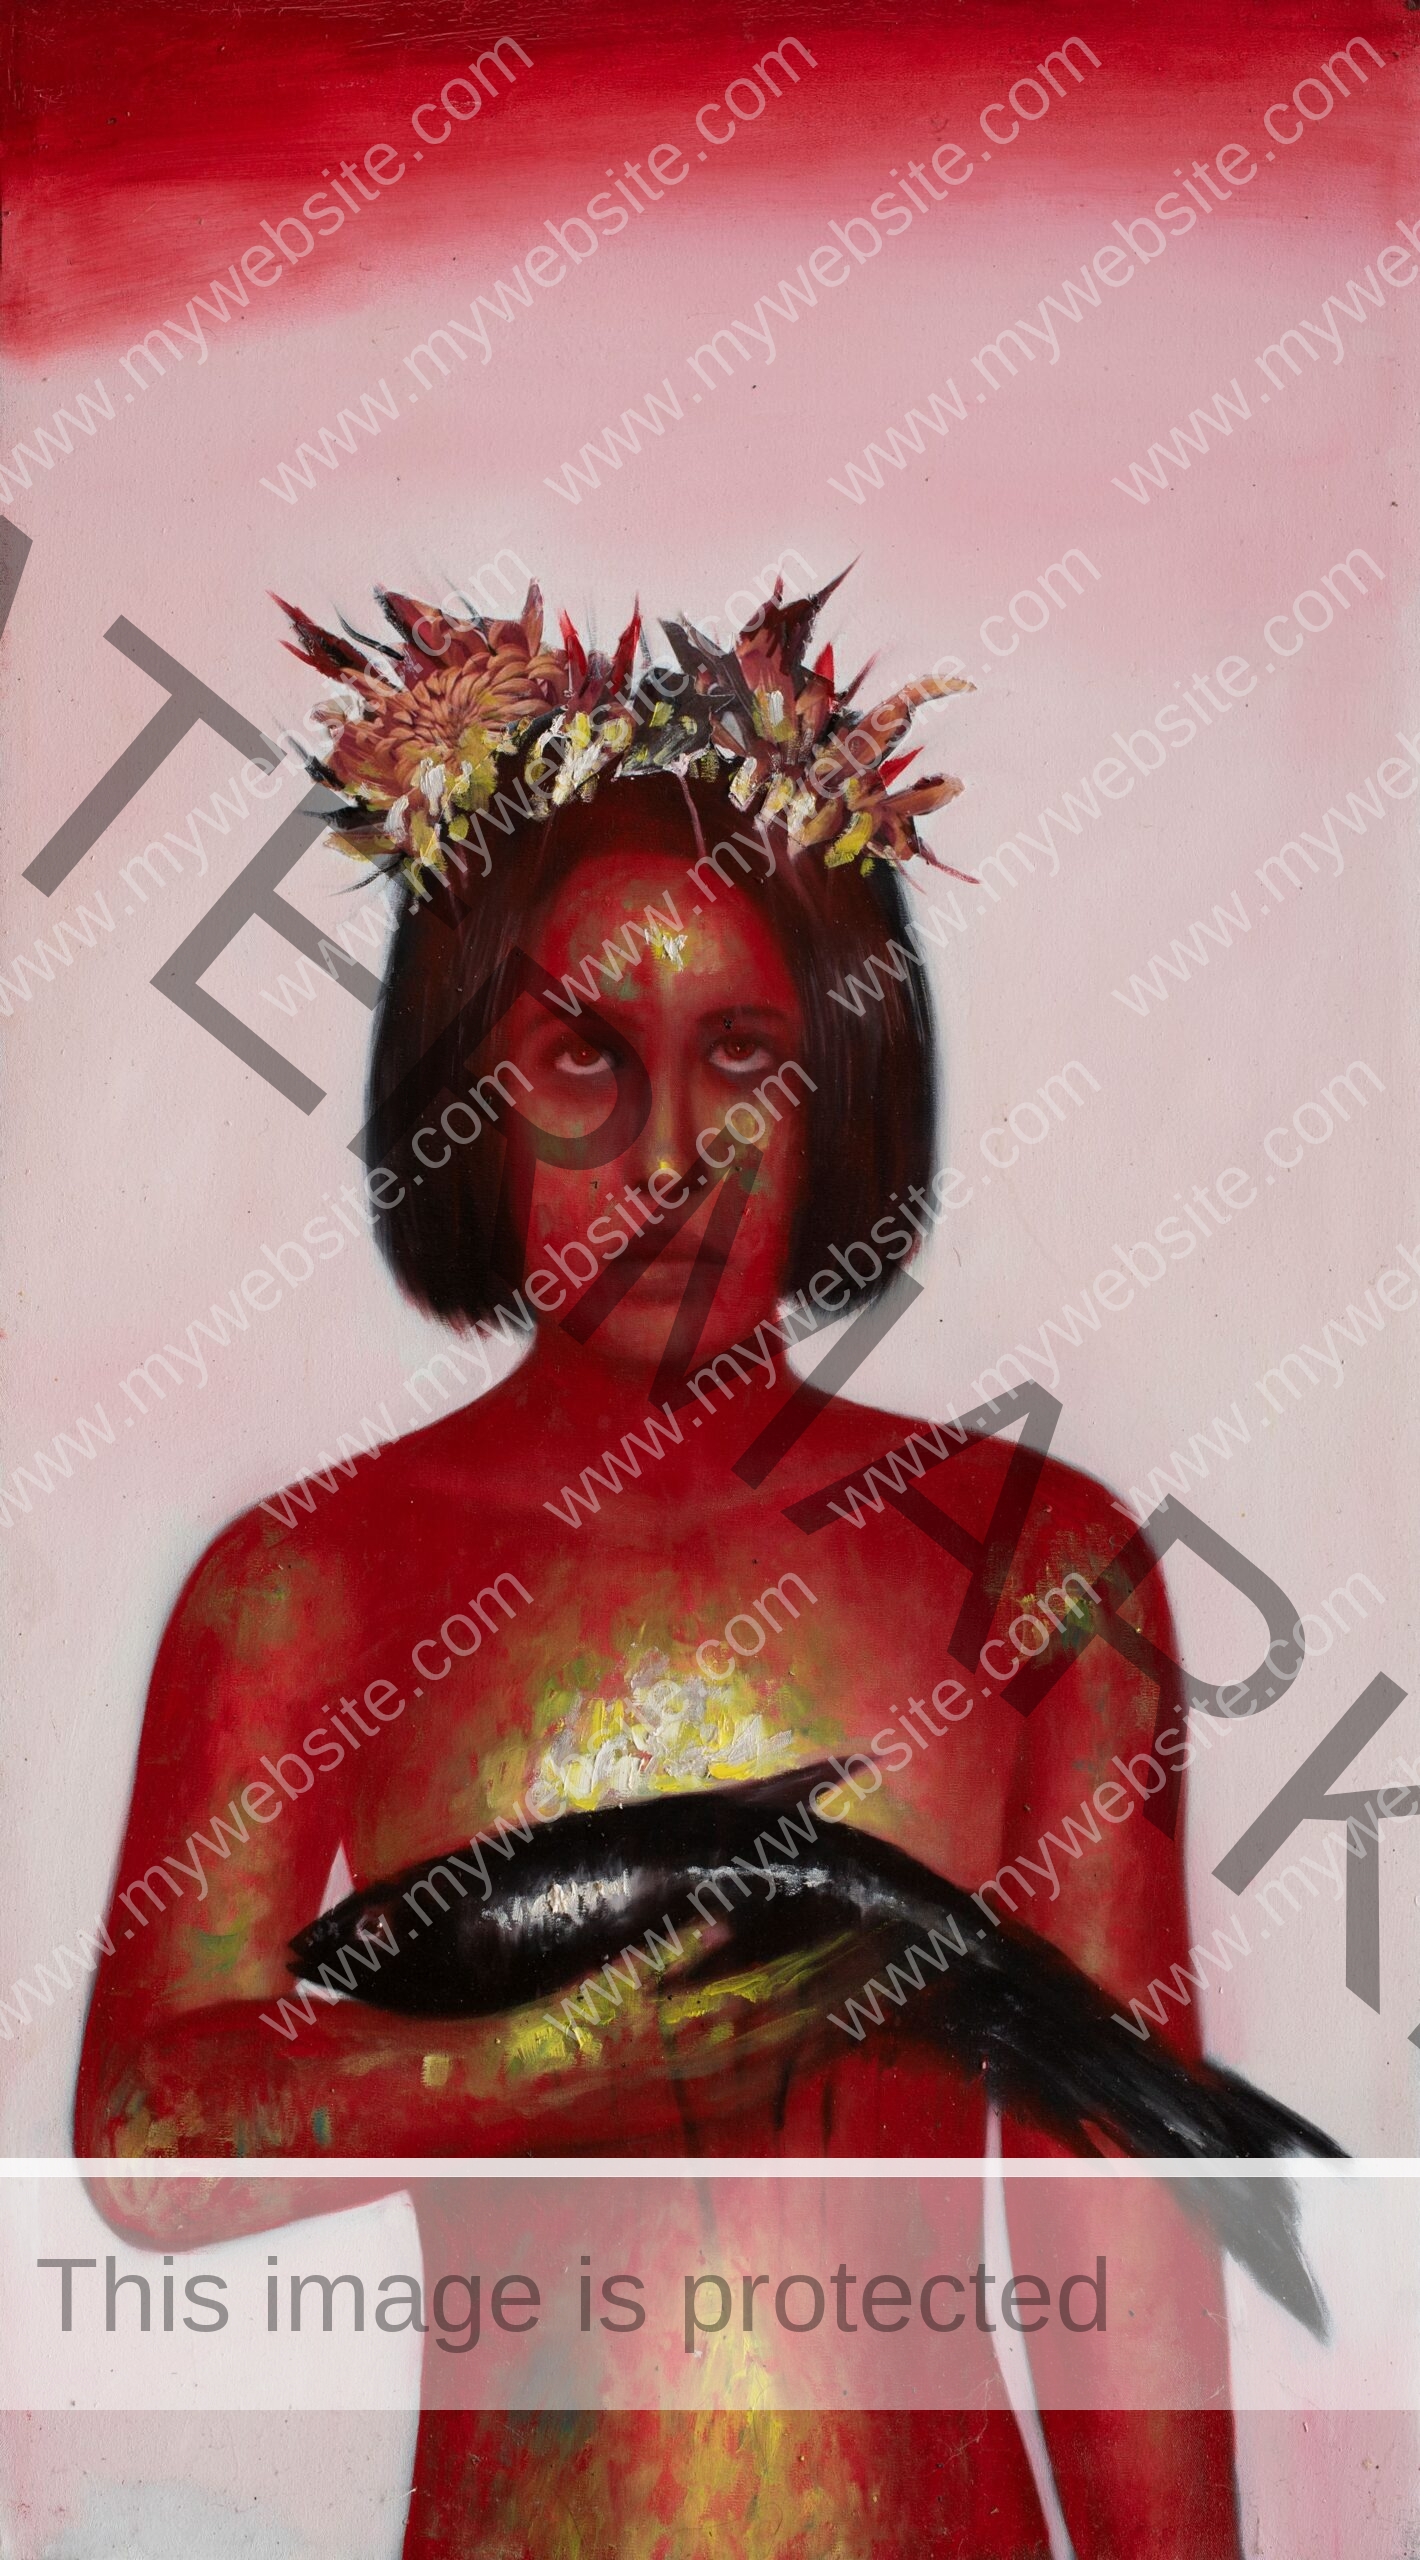 Floración de Los Lamentos by Pablo Mejias, featuring a figure painted in predominately red tones, holding a fish in one arm, with flowers - like thorns - adorn his head, evoking religious symbolism.